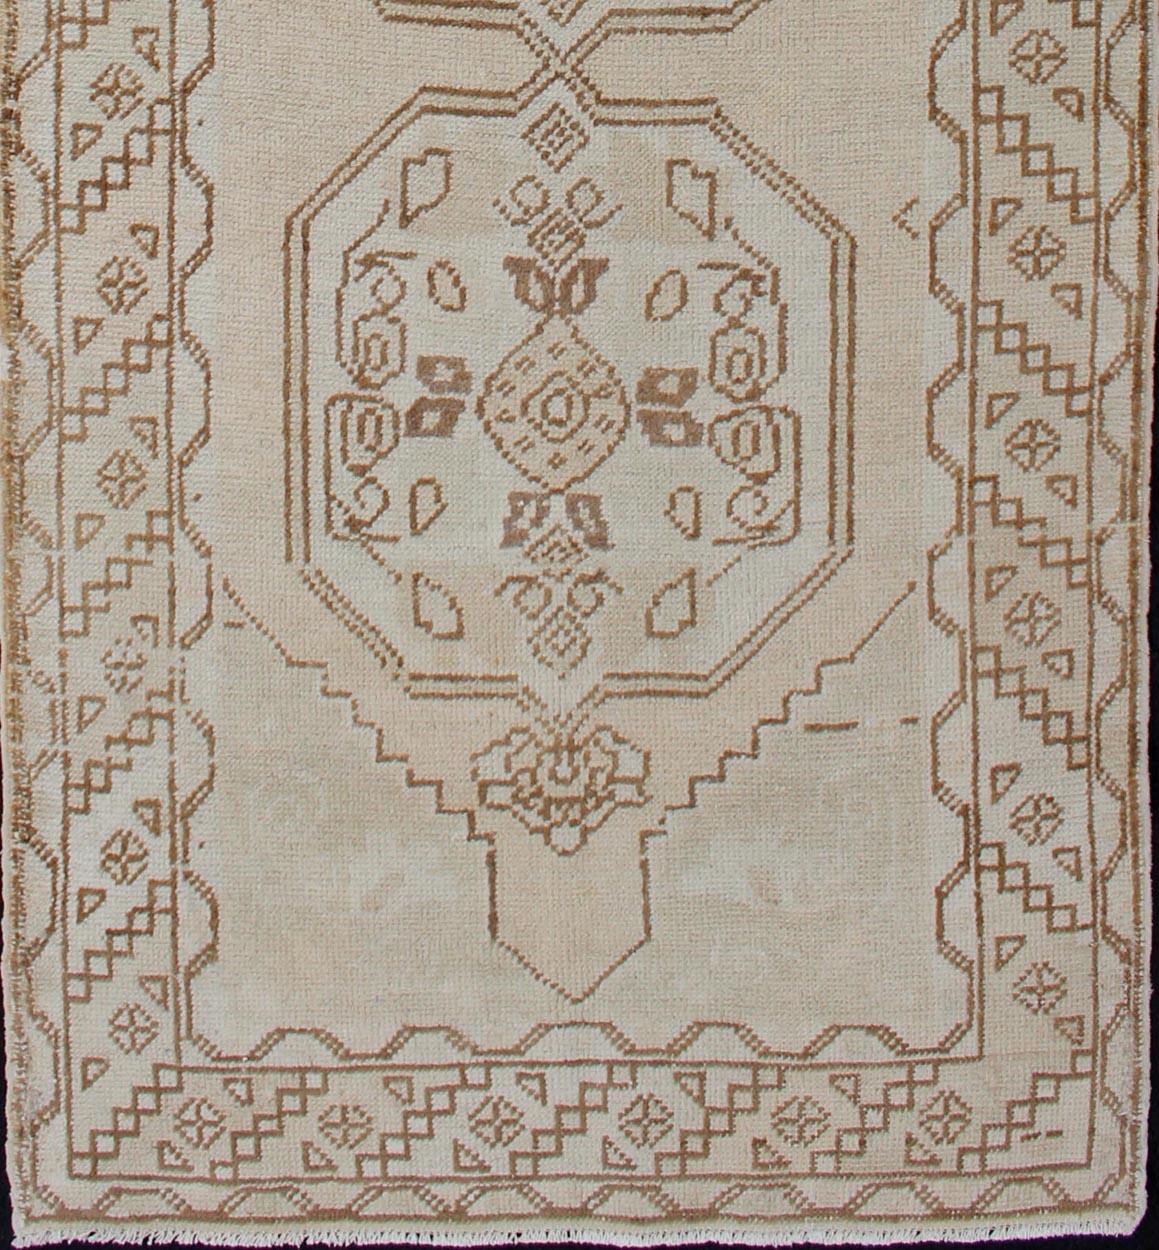 Turkish Oushak vintage carpet, rug en-176166, country of origin / type: Turkey / Oushak, circa 1950

This Oushak rug from Turkey features a tri-medallion design flanked by various stylized motifs and rendered in natural tones.
Measures: 3'3 x 9'8.